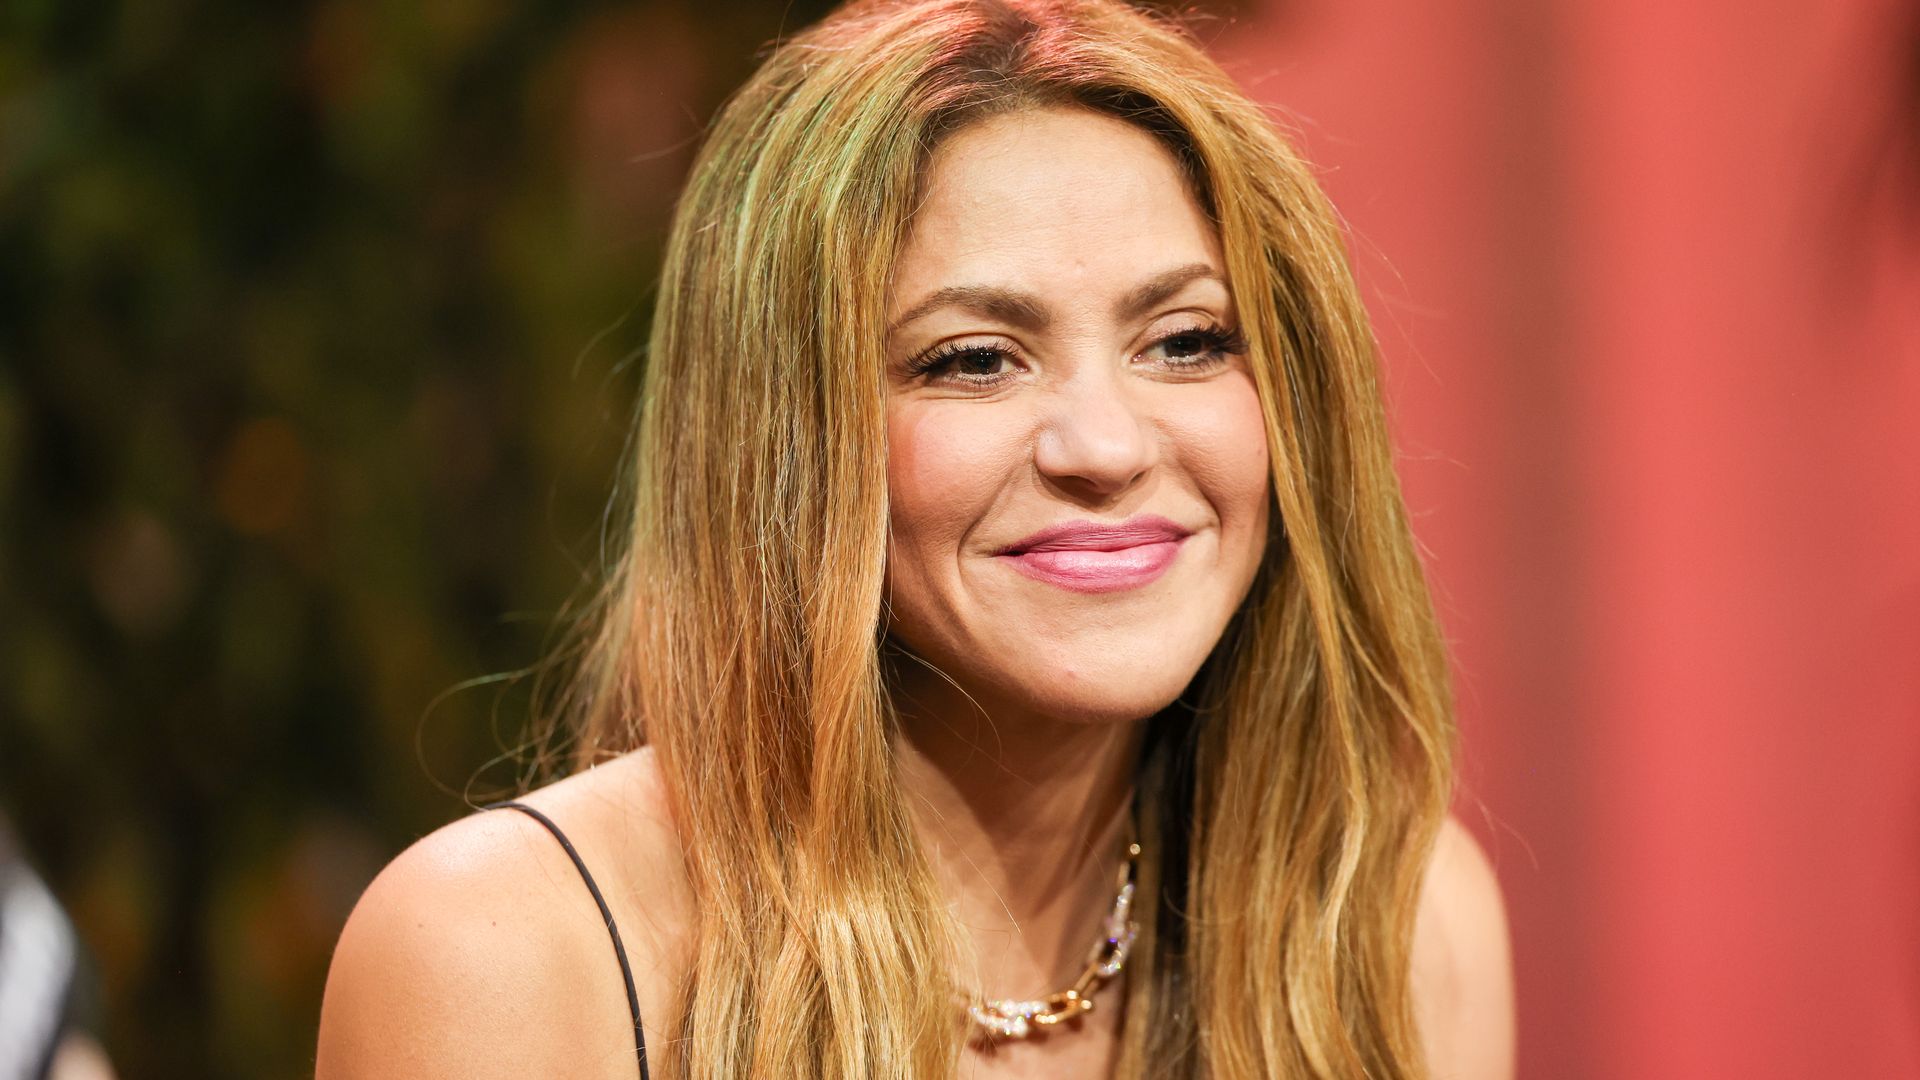 Shakira smiling with her hair down